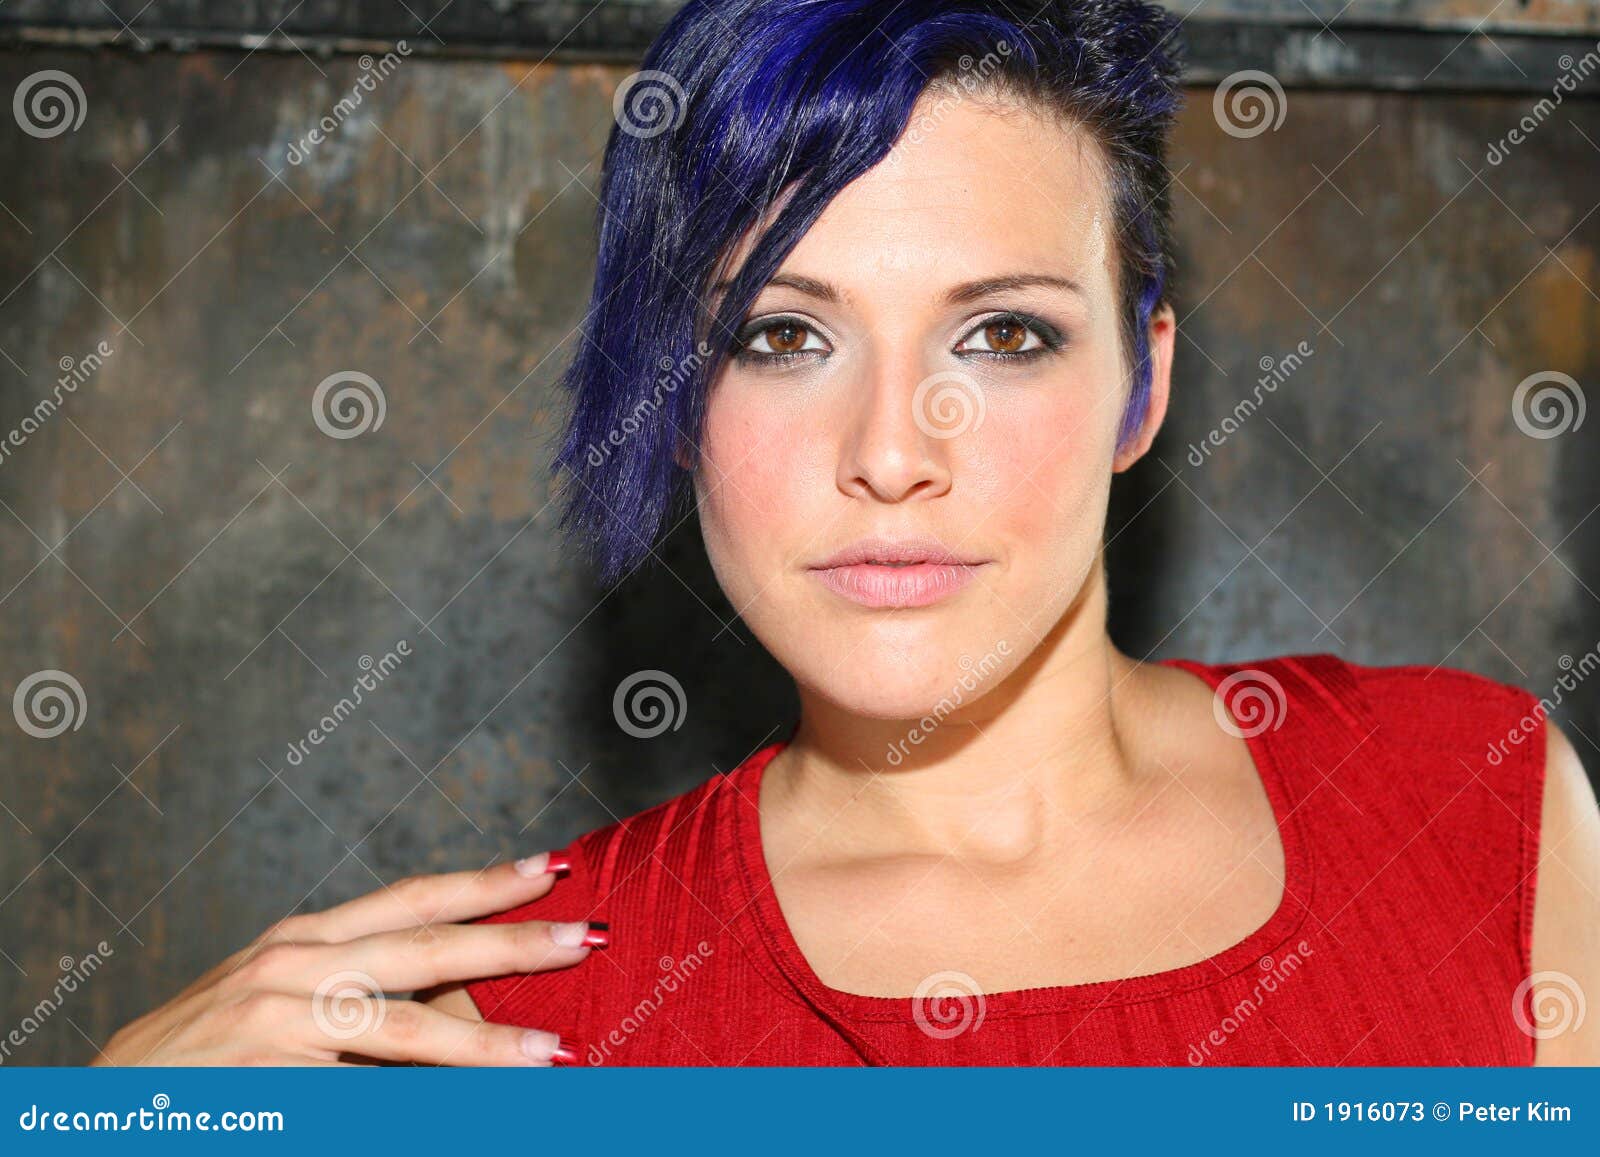 girl with the blue hair photography